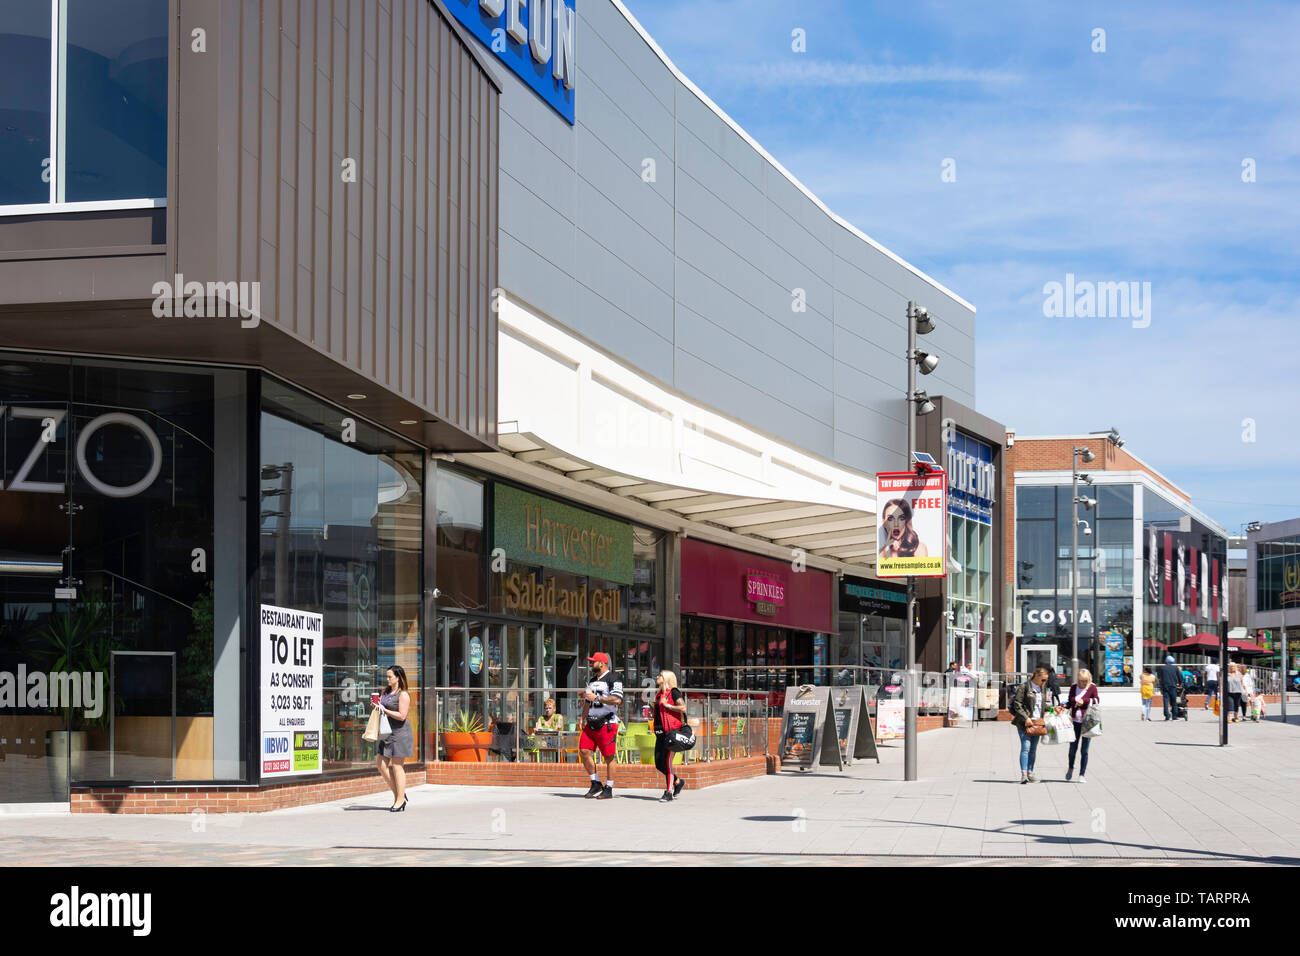 Restaurants and Odeon Cinema, Town Square, West Bromwich, West Midlands, England, United Kingdom Stock Photo